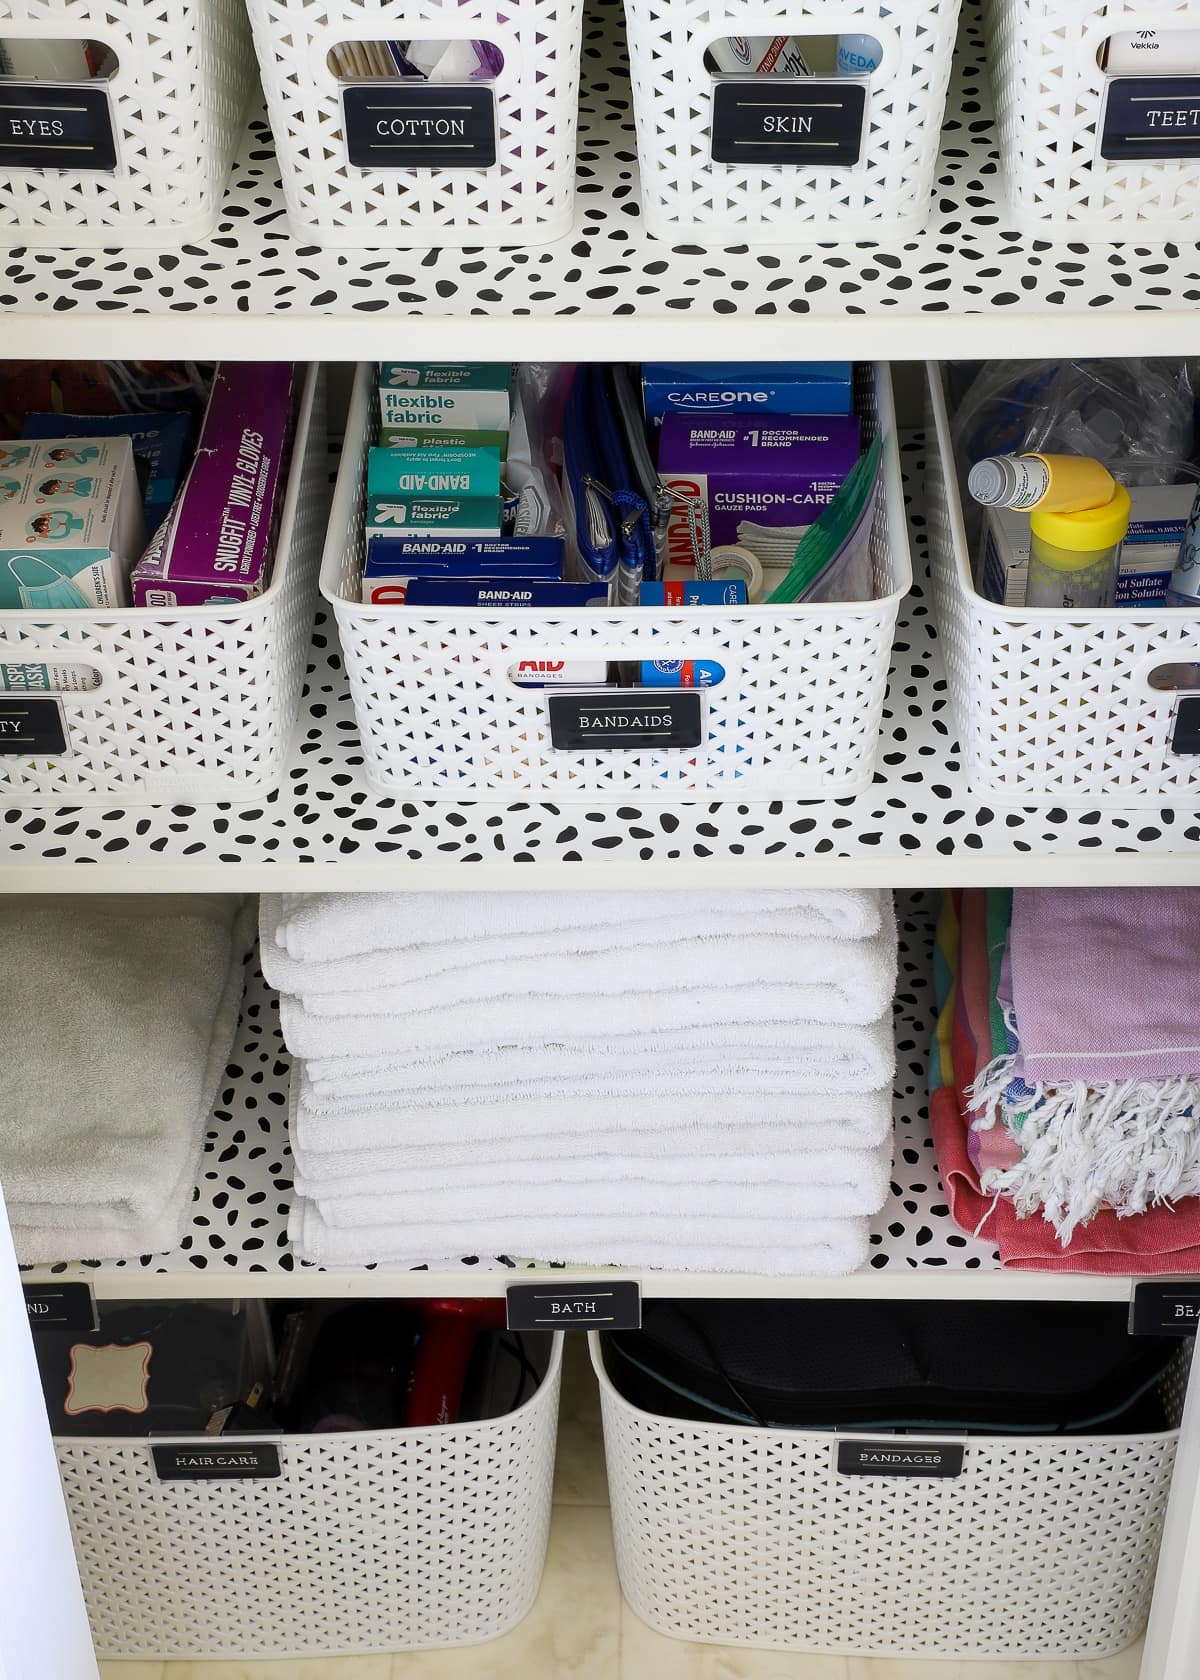 Top Tips for a Perfectly Organized Bathroom Closet (That Looks